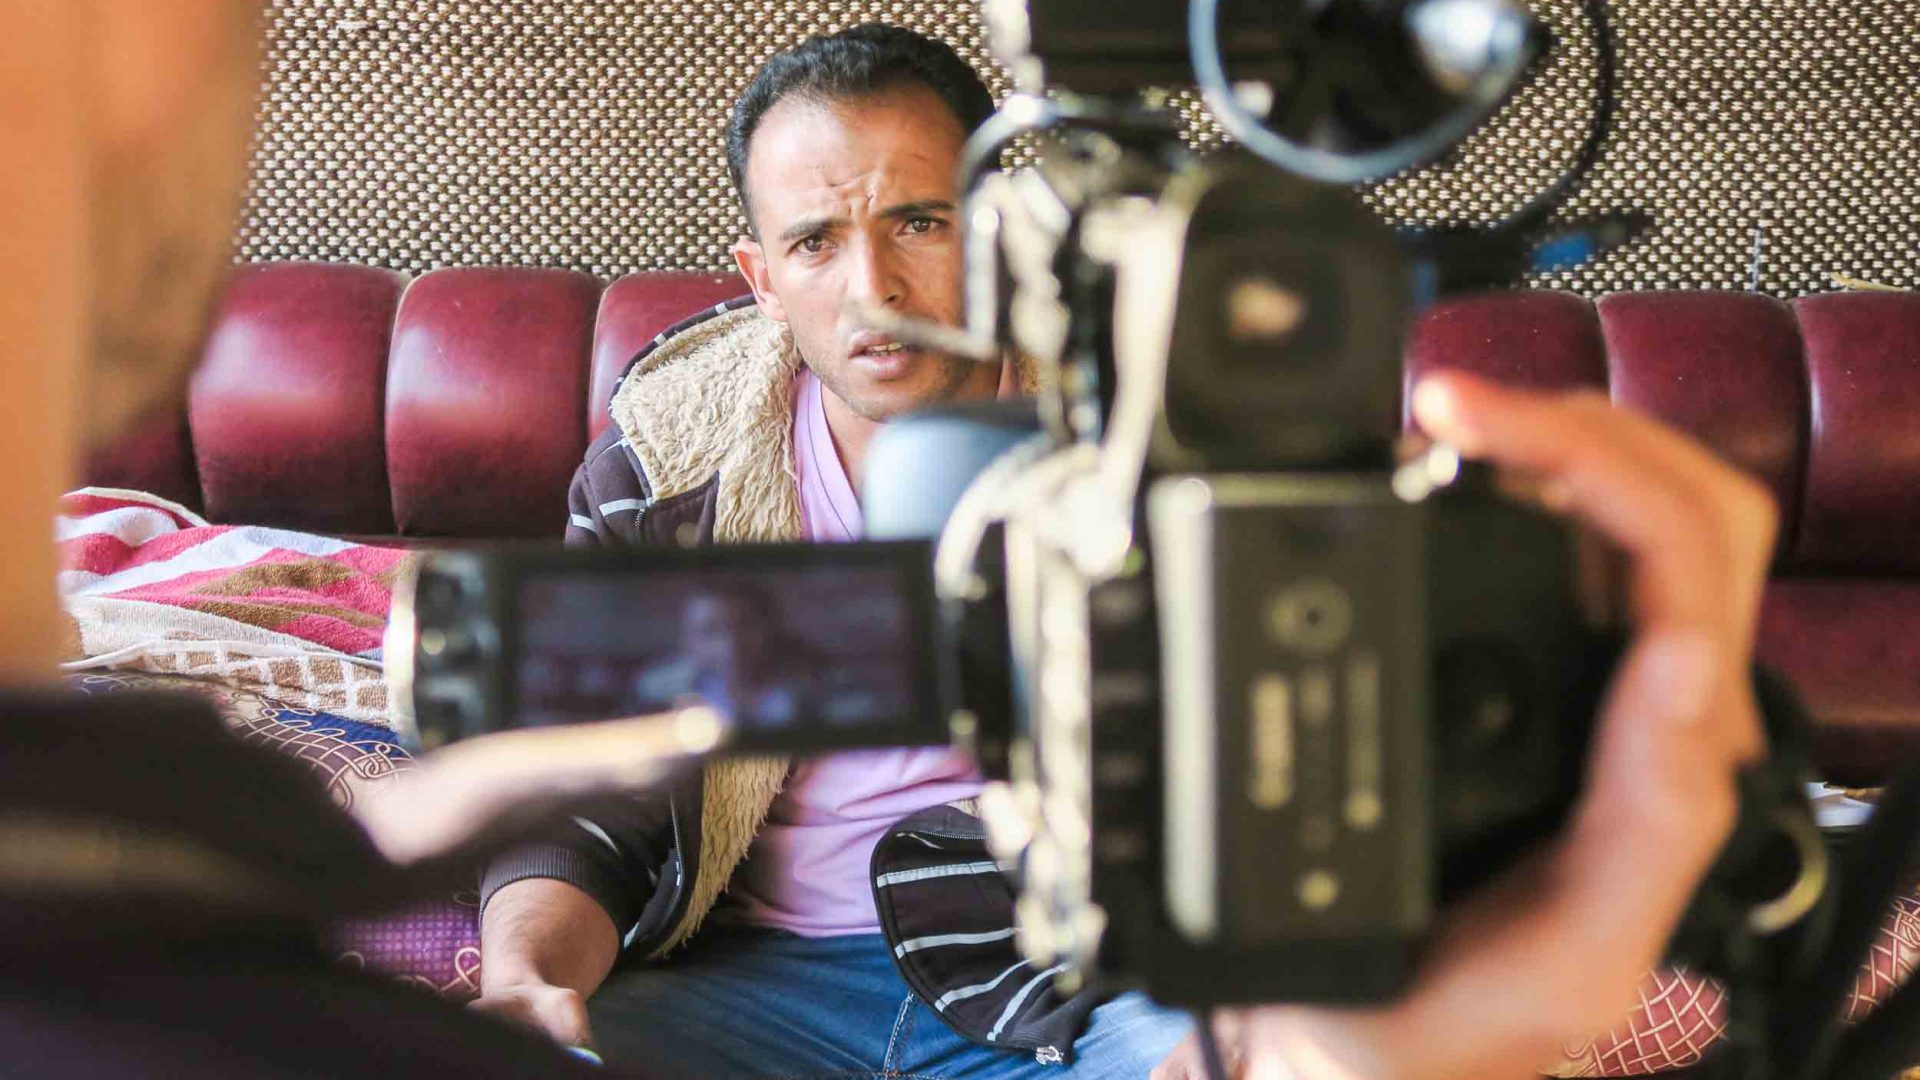 Leon filming a Bedouin person in the West Bank.